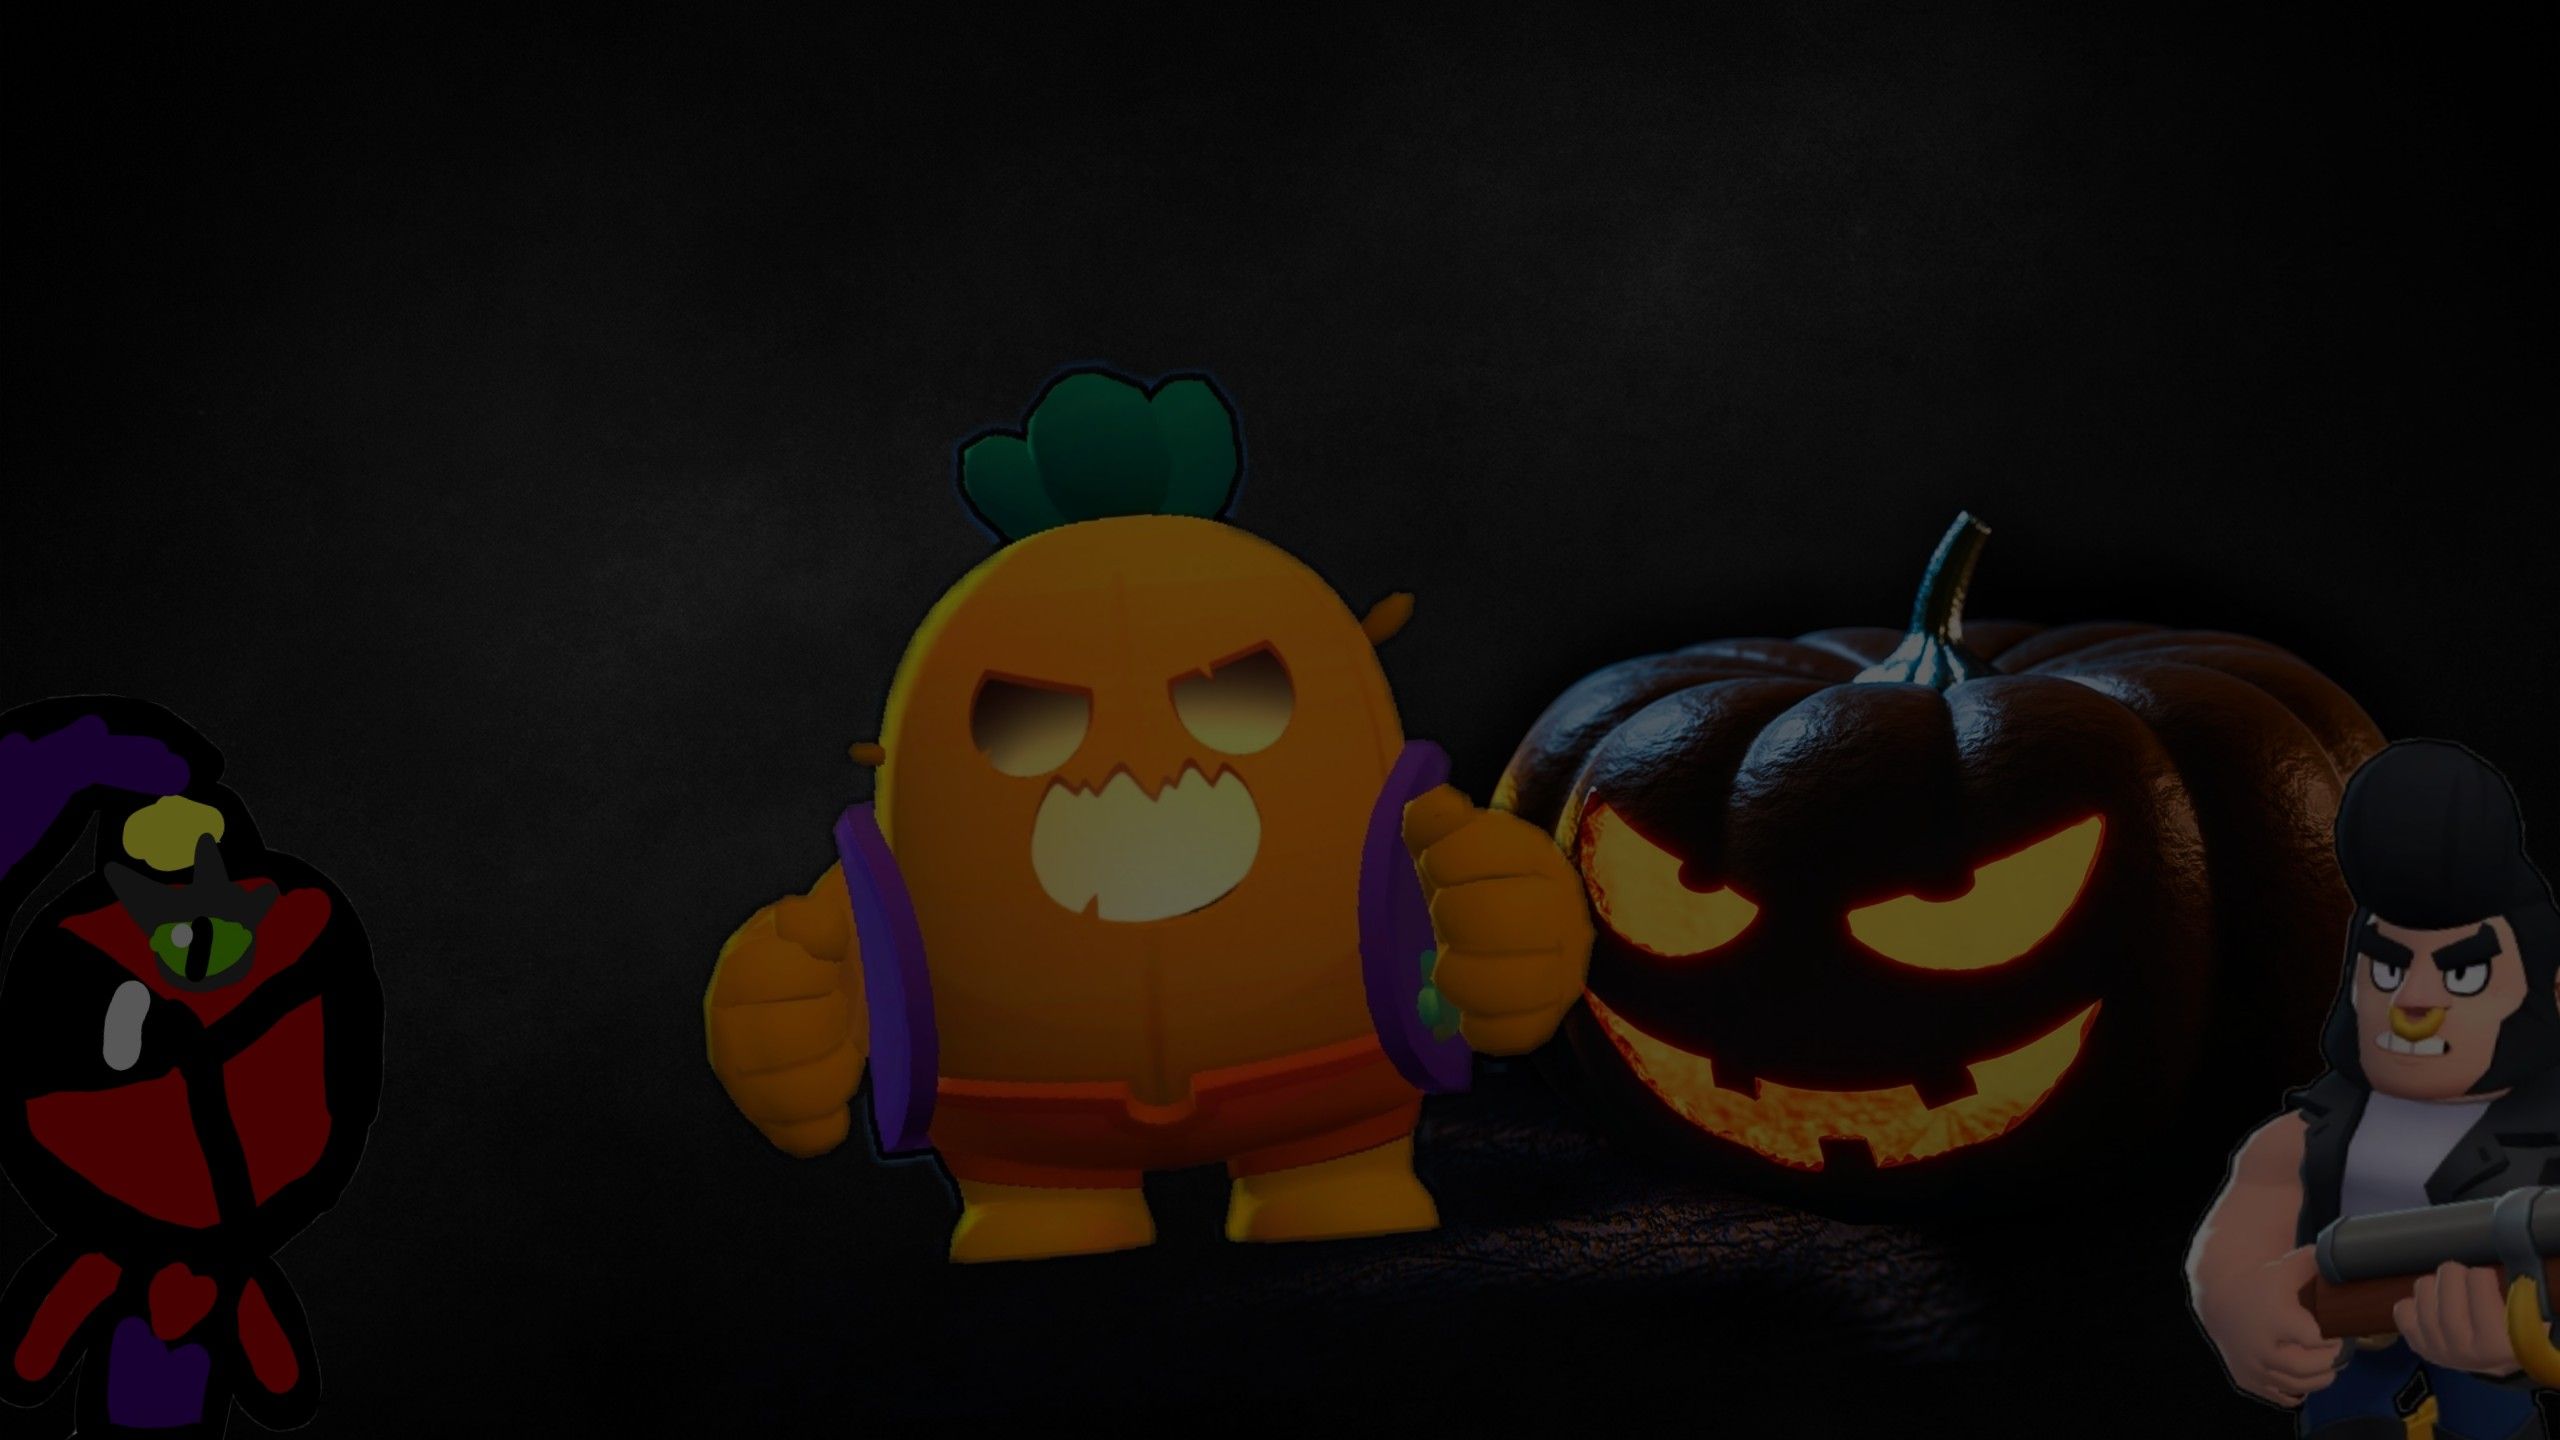 halloween Image by more brawl post